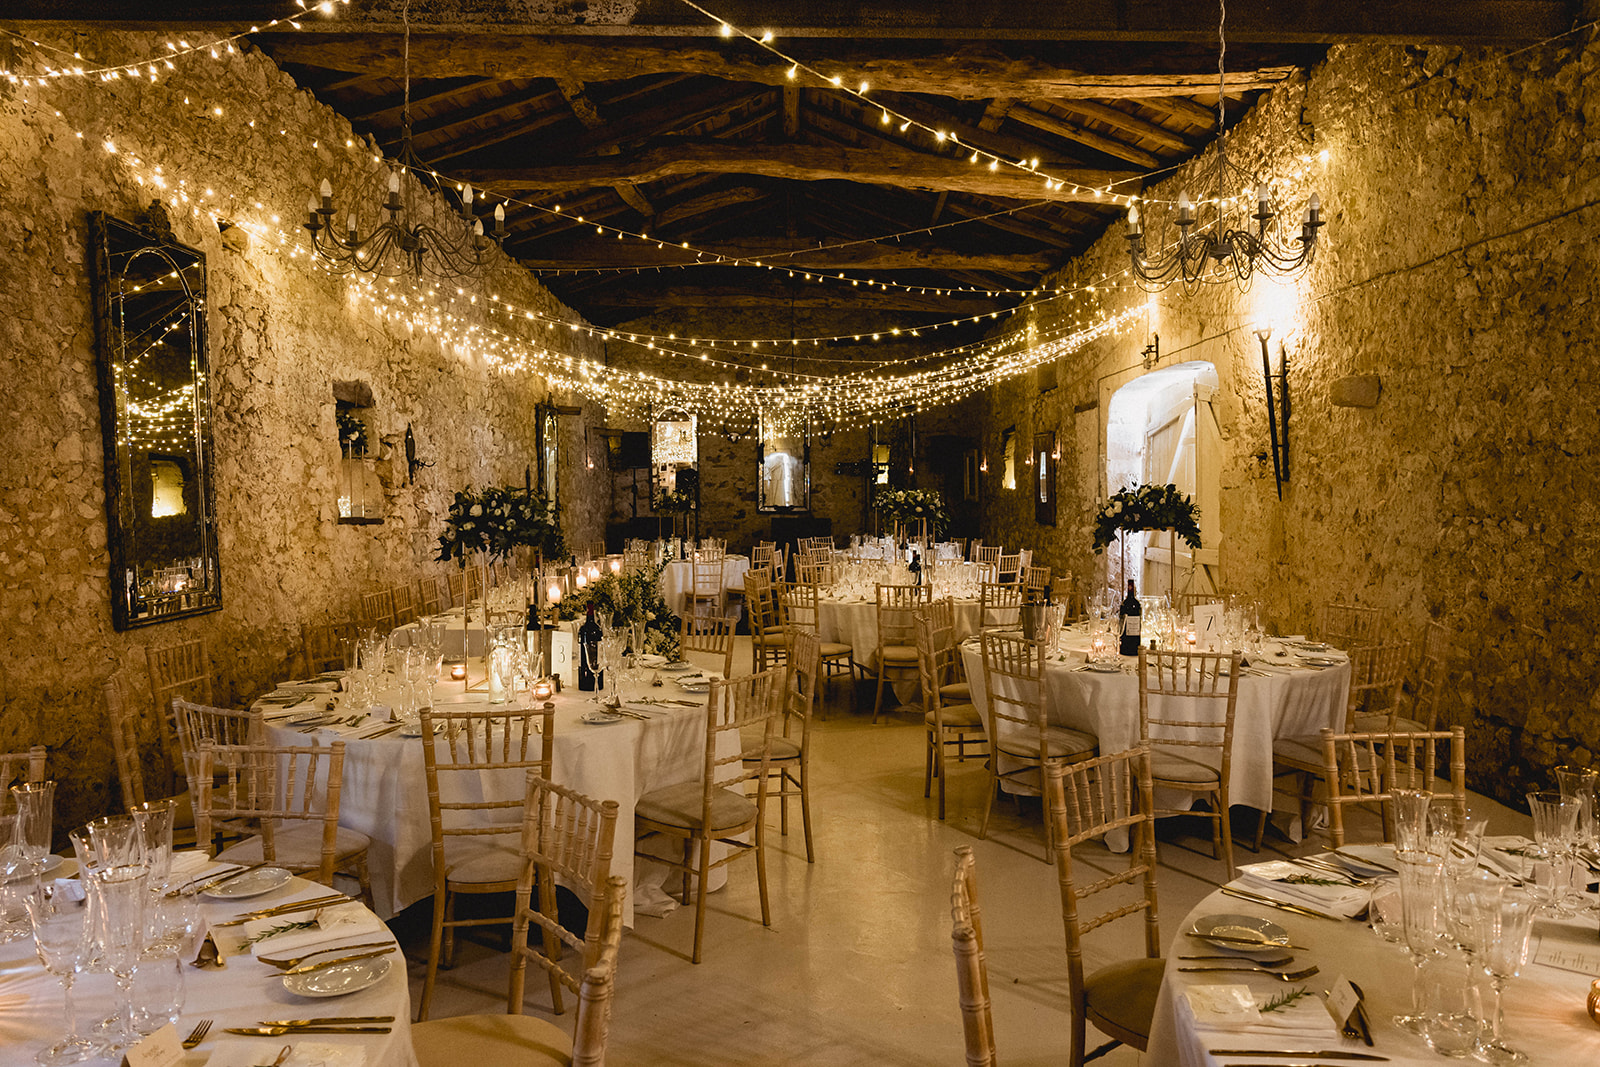 Barn Dinner set-up at Chateau Soulac in South West France